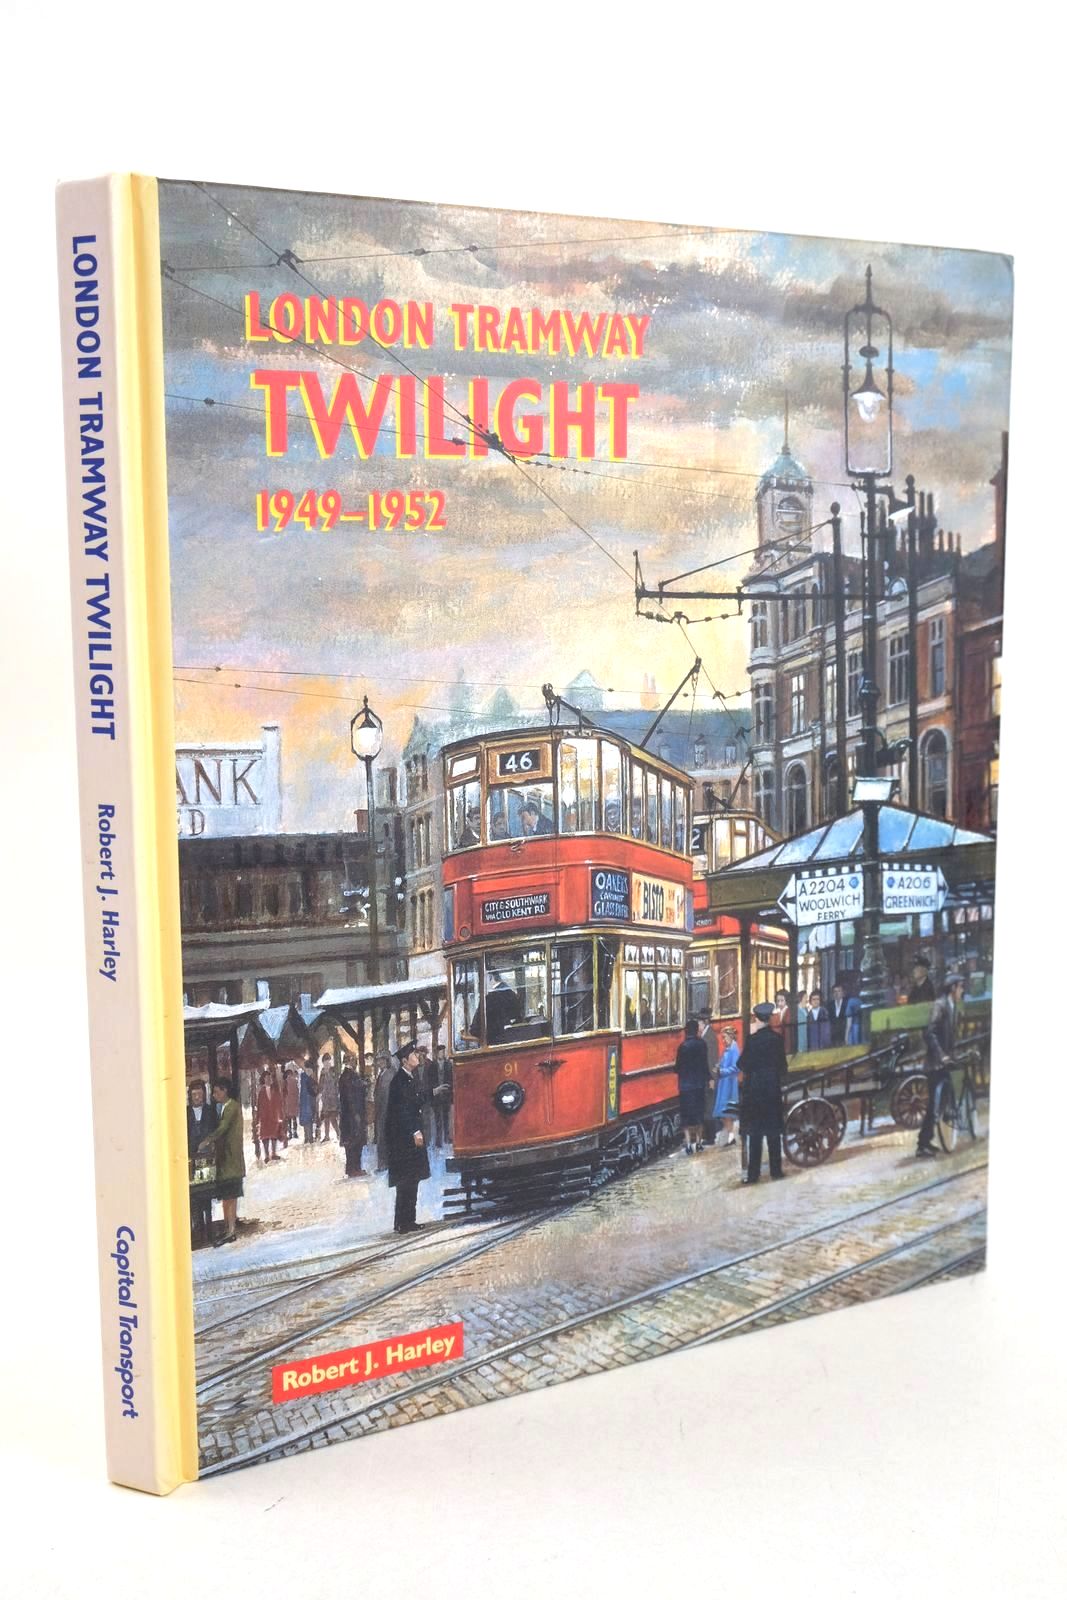 Photo of LONDON TRAMWAY TWILIGHT 1949-1952 written by Harley, Robert J. published by Capital Transport (STOCK CODE: 1327087)  for sale by Stella & Rose's Books